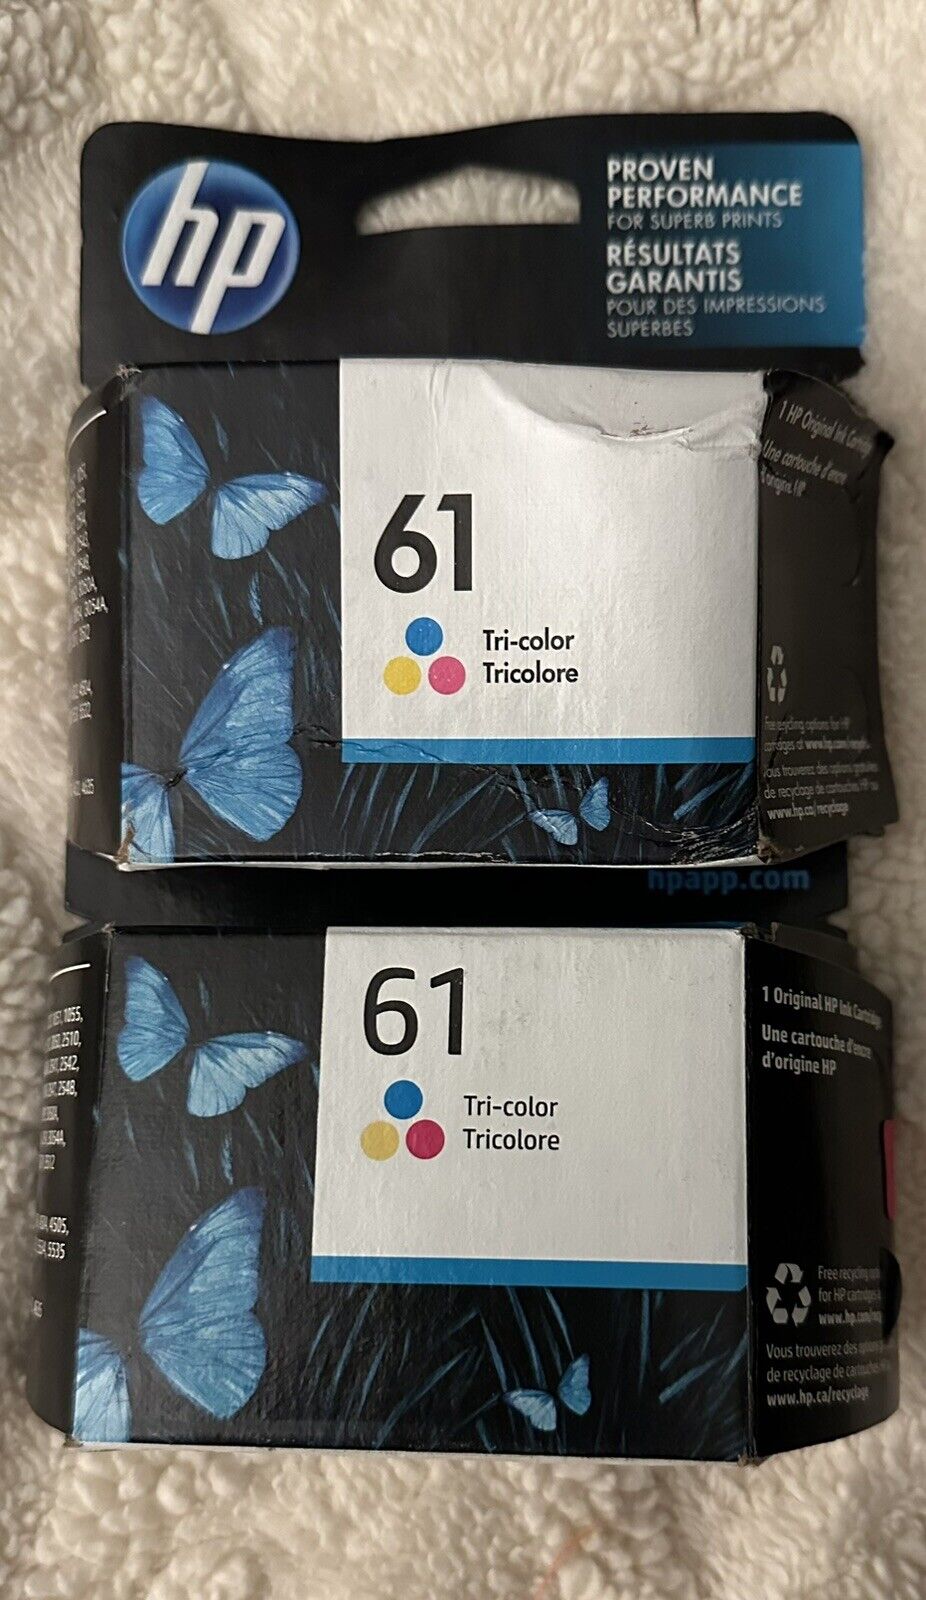 Genuine Hp 61 Tri Color Ink Cartridge Lot Of Two New/unopened